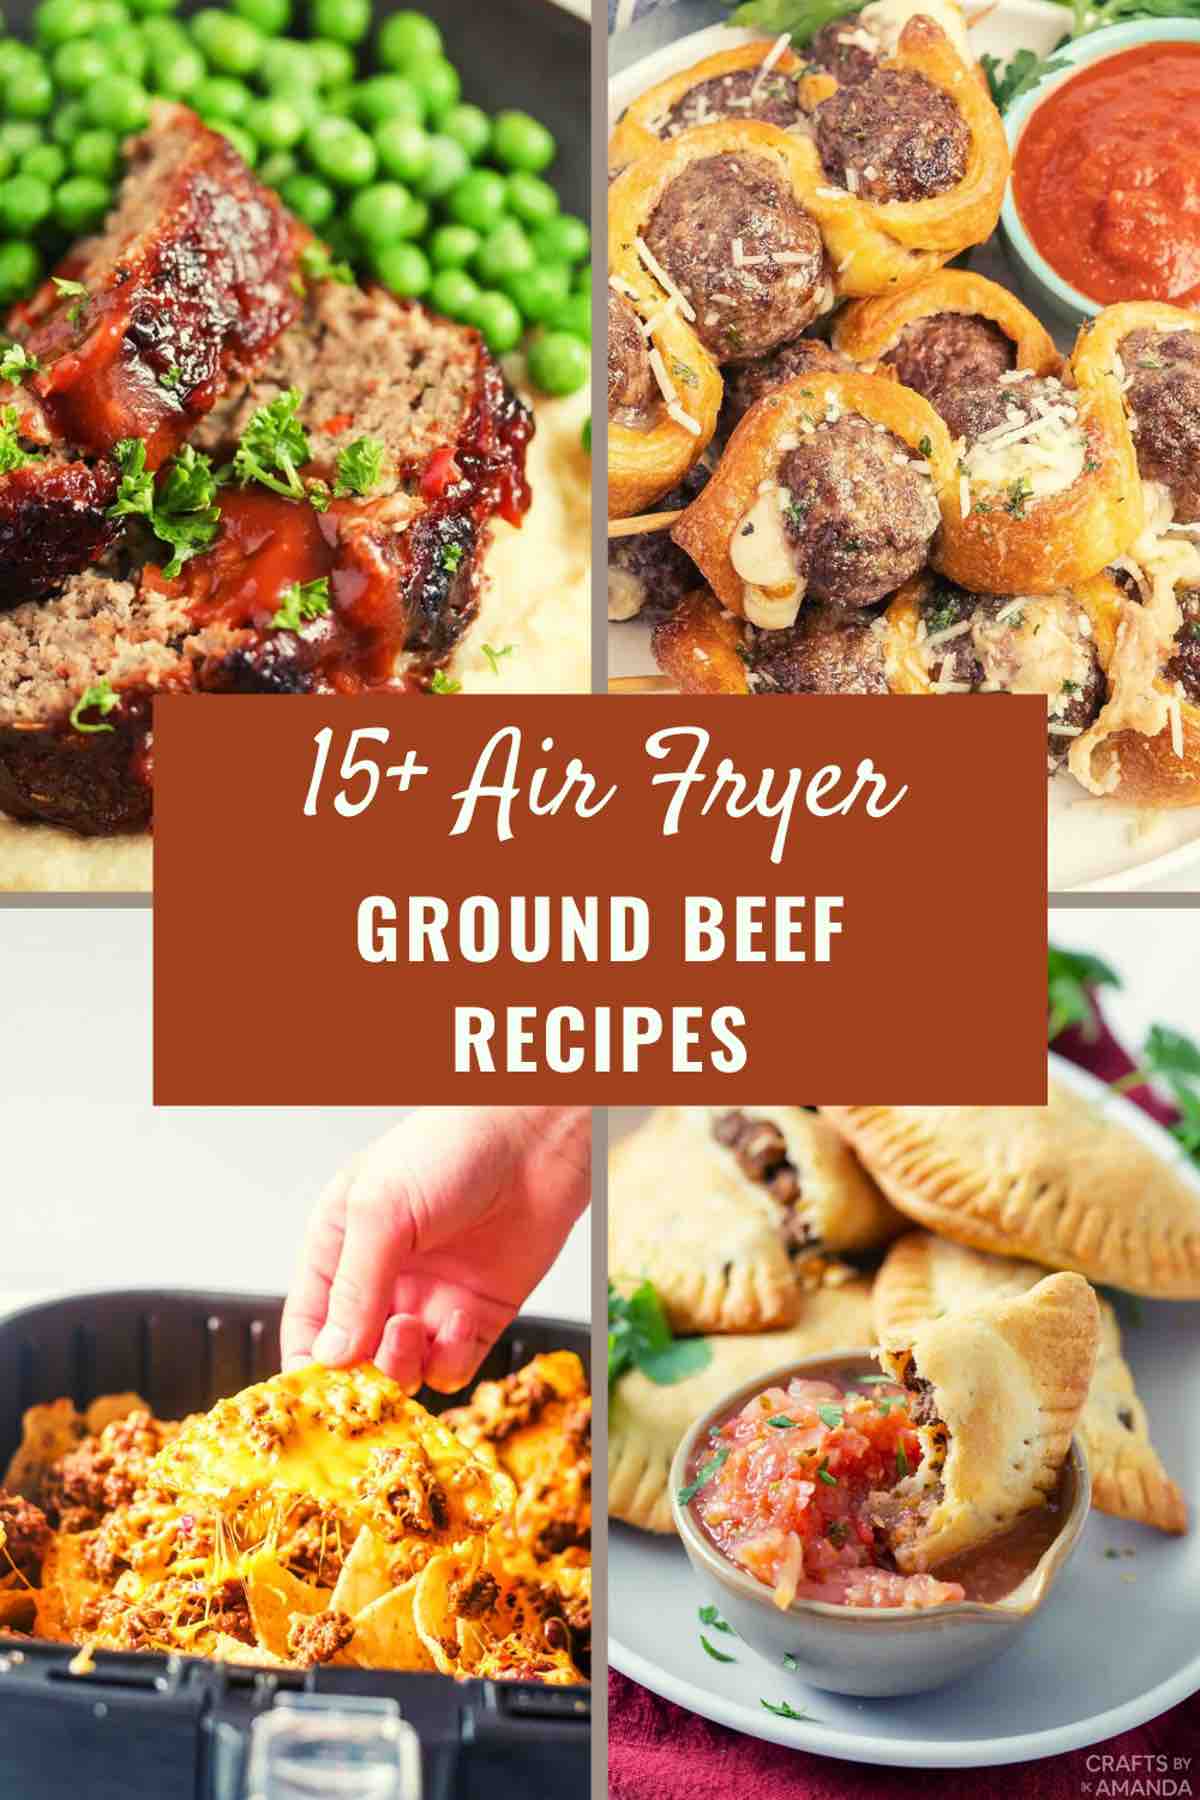 15+ easy air fryer ground beef recipes that are perfect for busy weeknight meals.